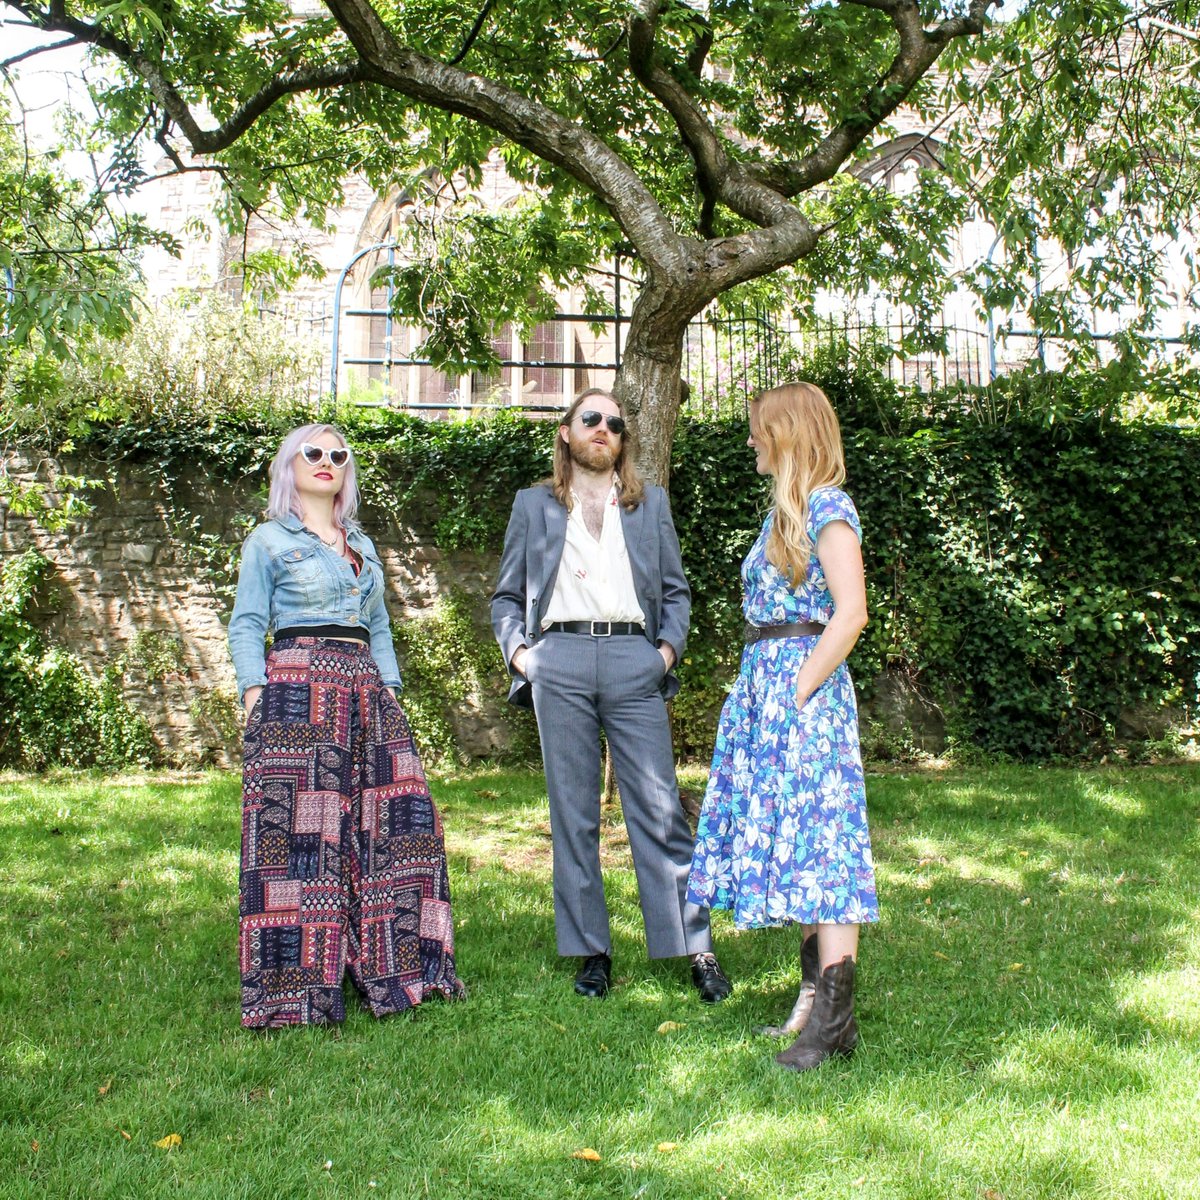 We're starting to feel summery vibes in Bristol. Can't wait to look cool in our sunglasses, wear fun outfits, and play at festivals again - starting with Dart Music Festival on 19/05 and Wimborne Minster Folk Festival on 9/06😍 #festivals #music #UK #Bristol #folk #americana